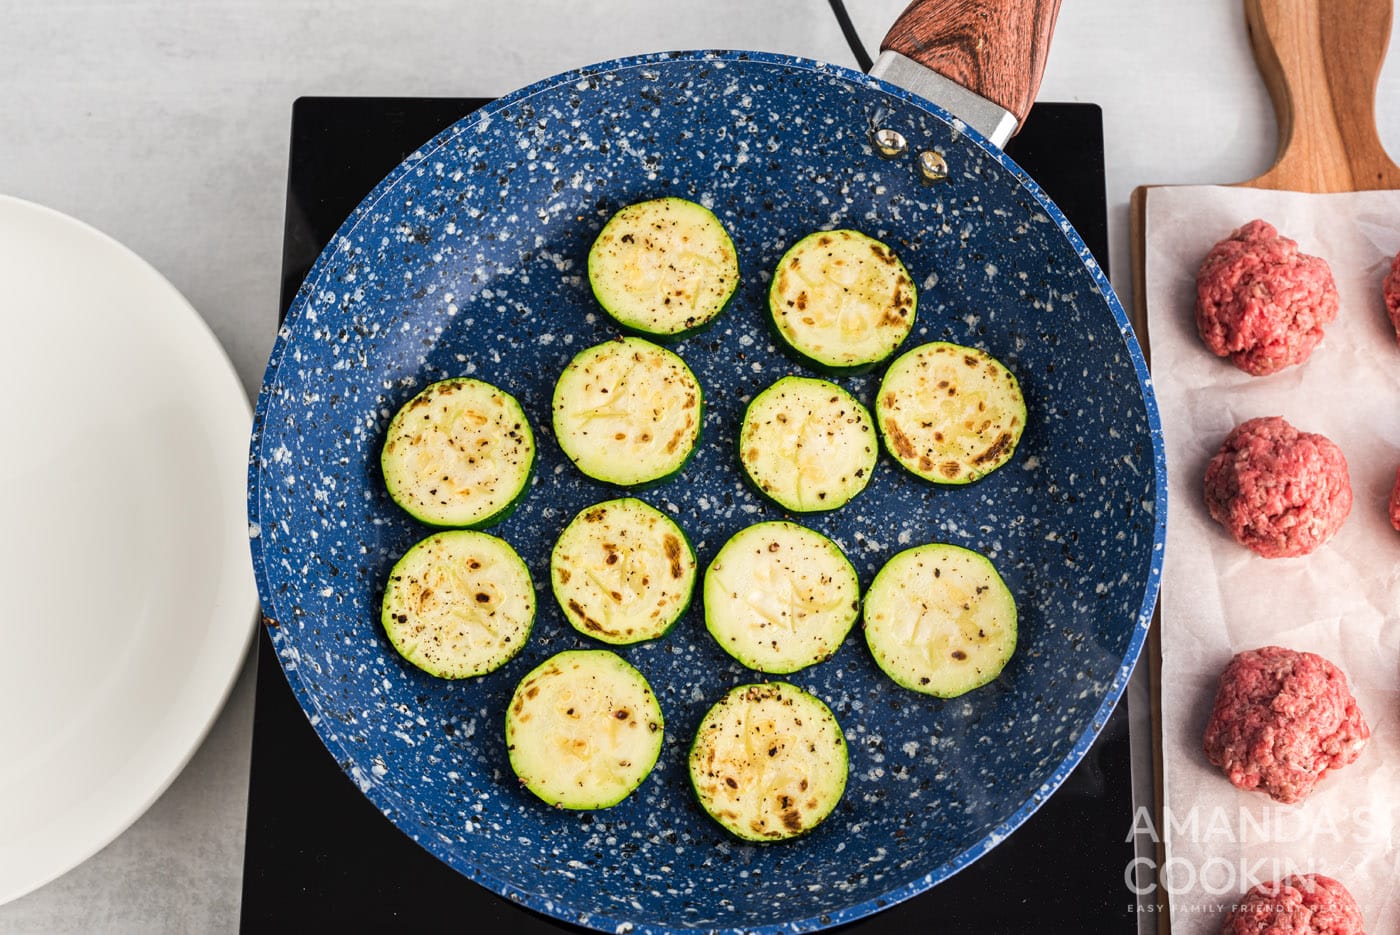 zucchini rounds browned in a skillet